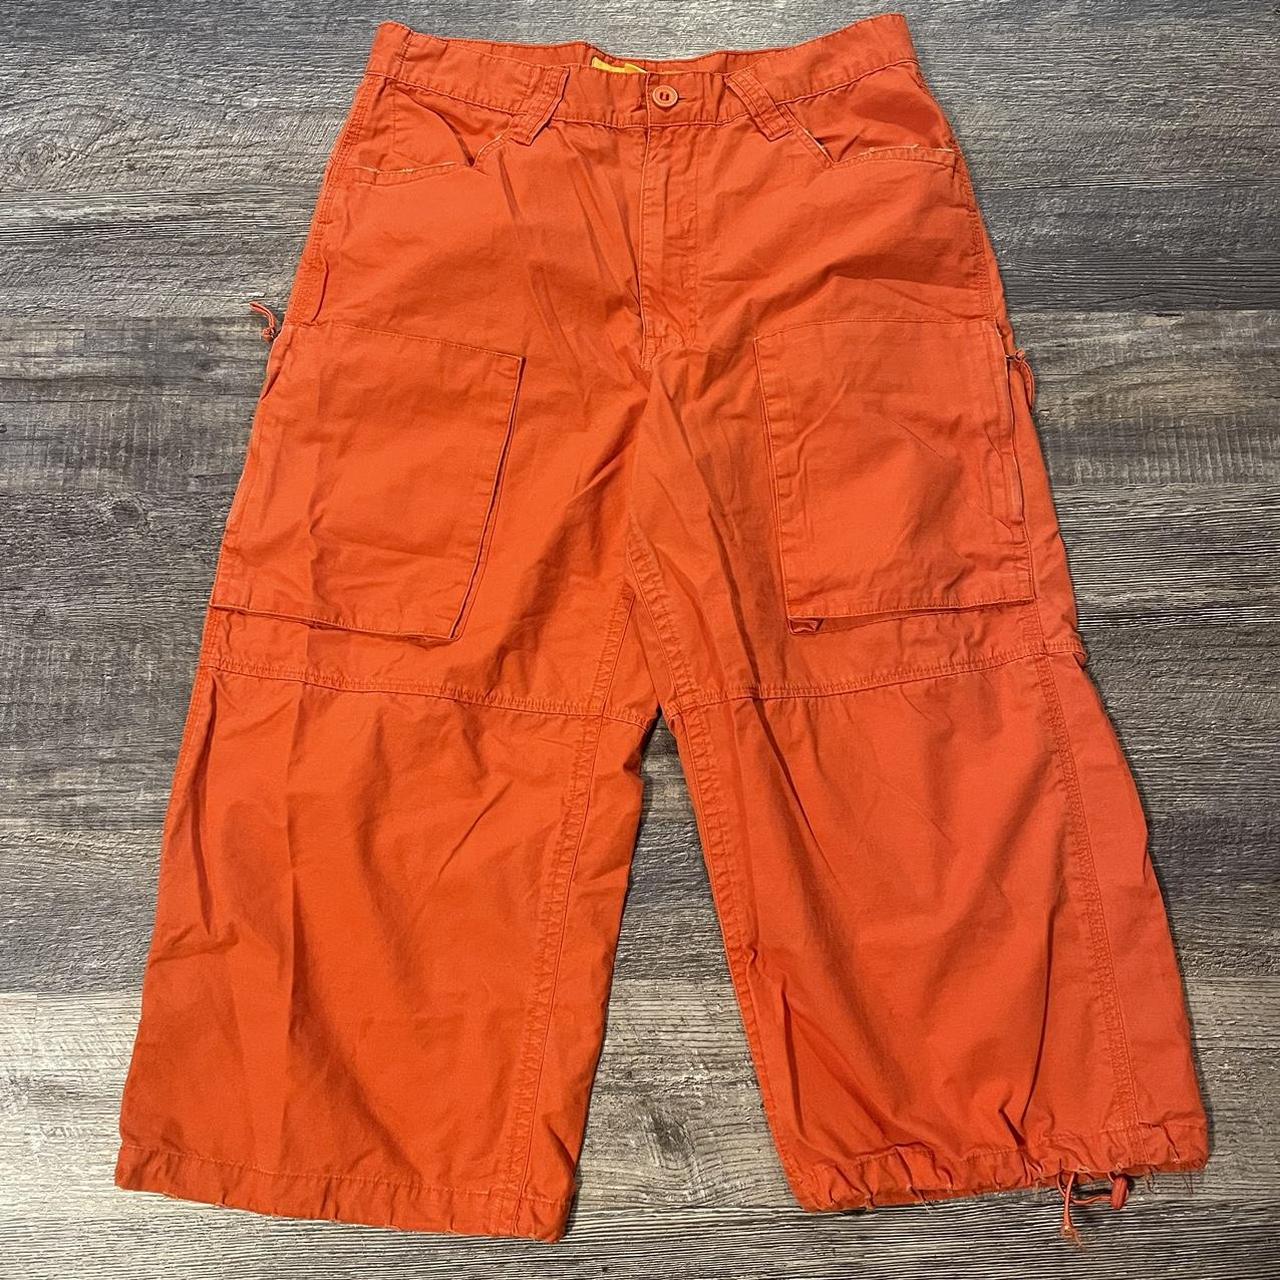 State Property Rocawear Baggy Pants 38x32 Actual... - Depop